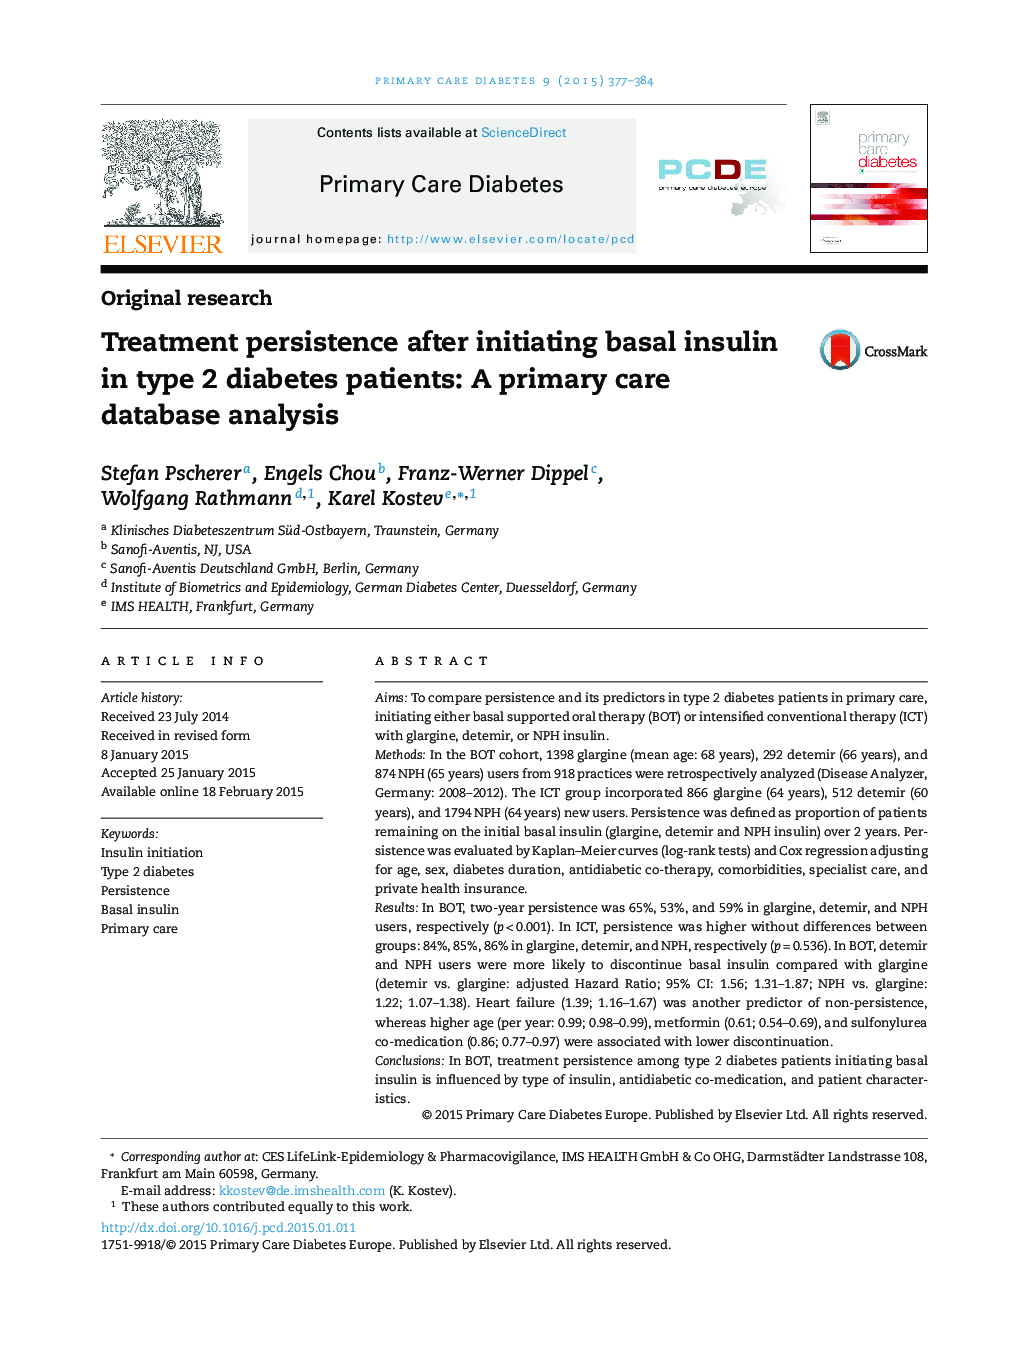 Original researchTreatment persistence after initiating basal insulin in type 2 diabetes patients: A primary care database analysis